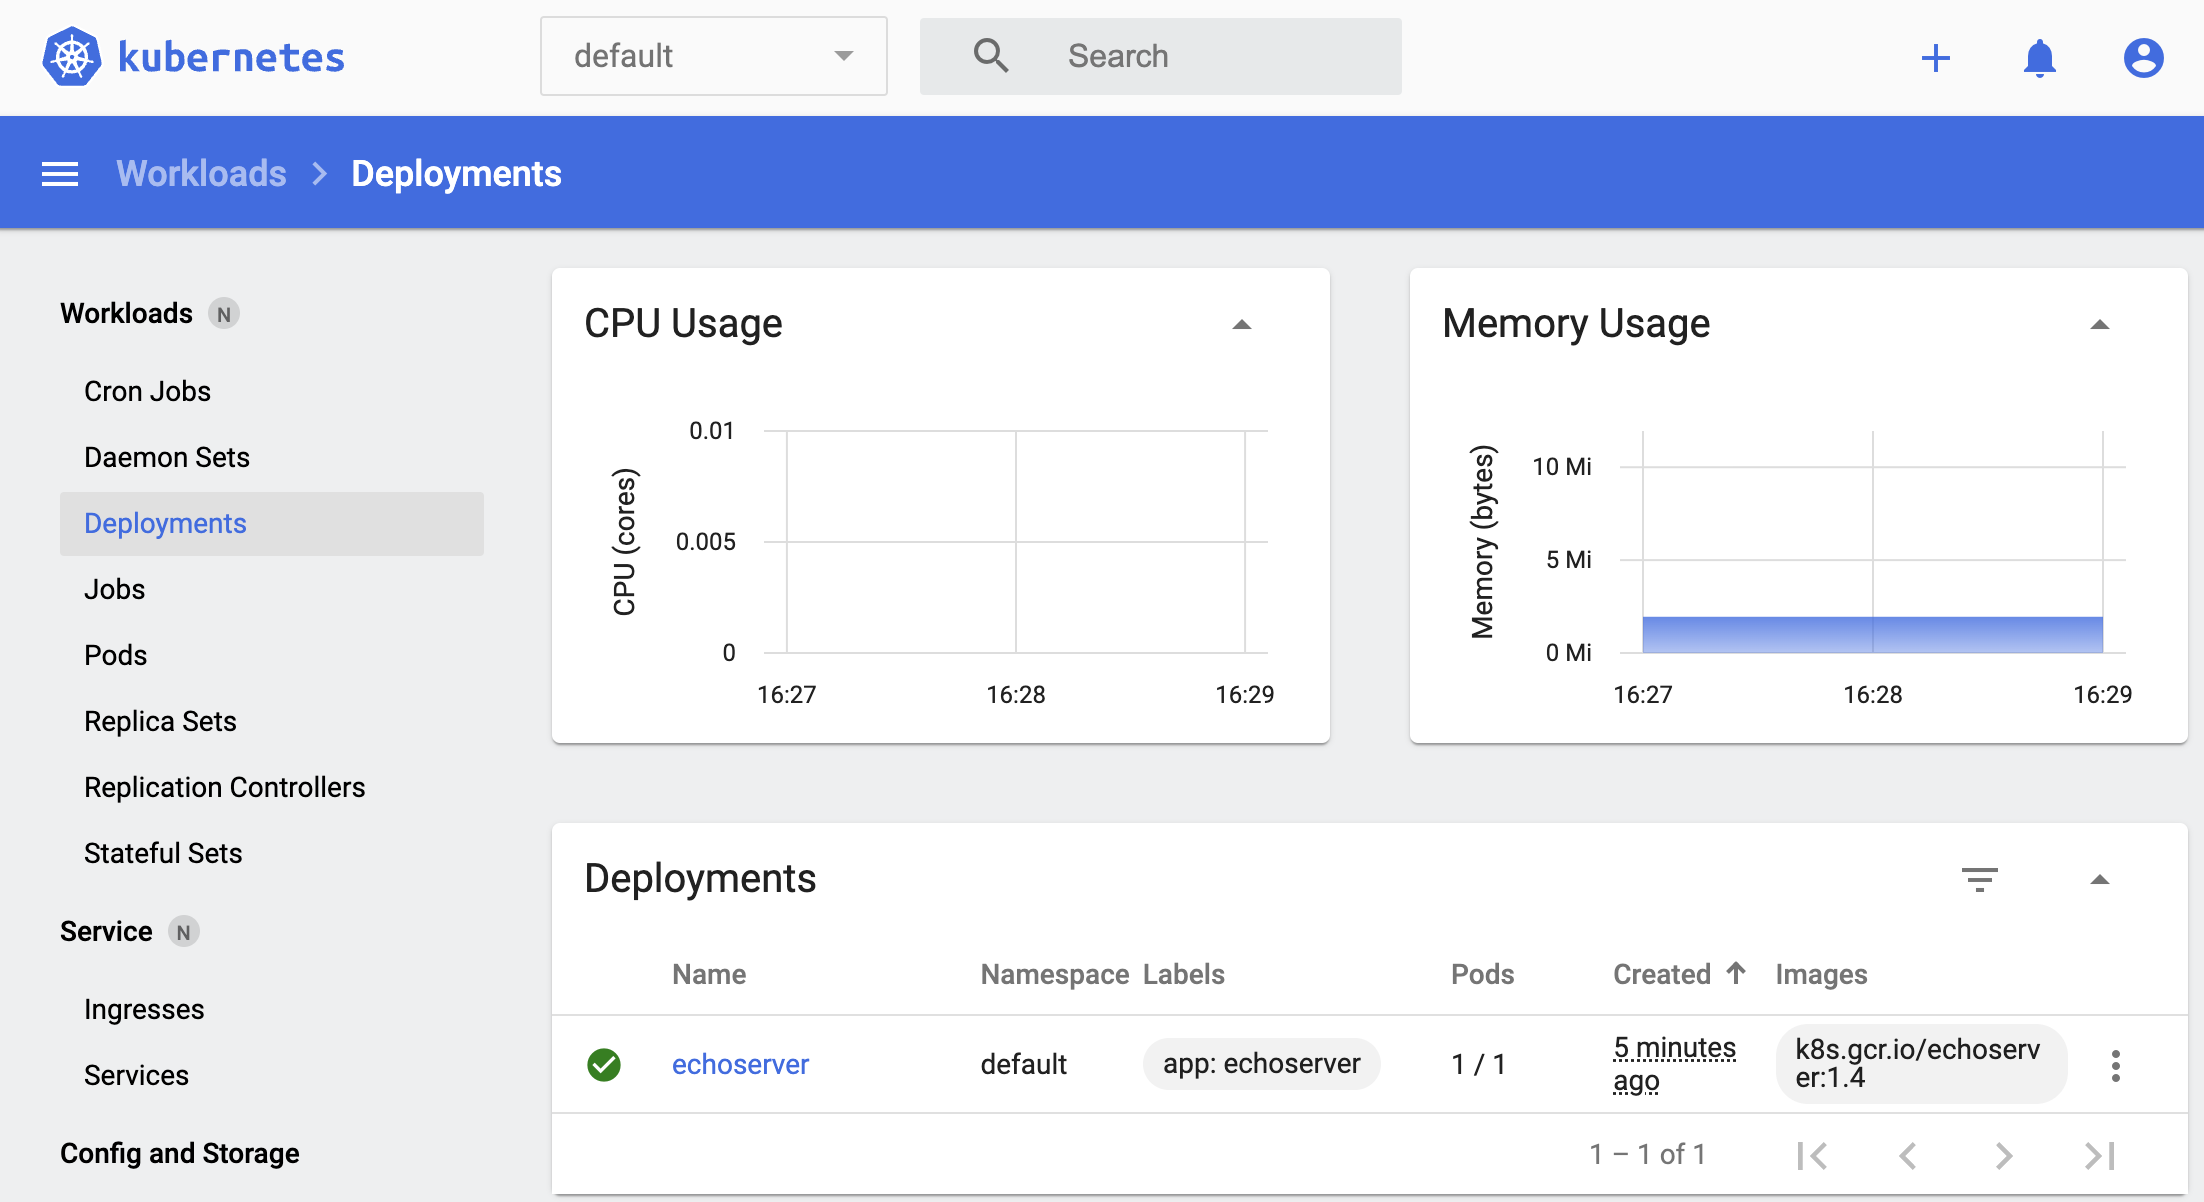 Deployments in the Kubernetes dashboard